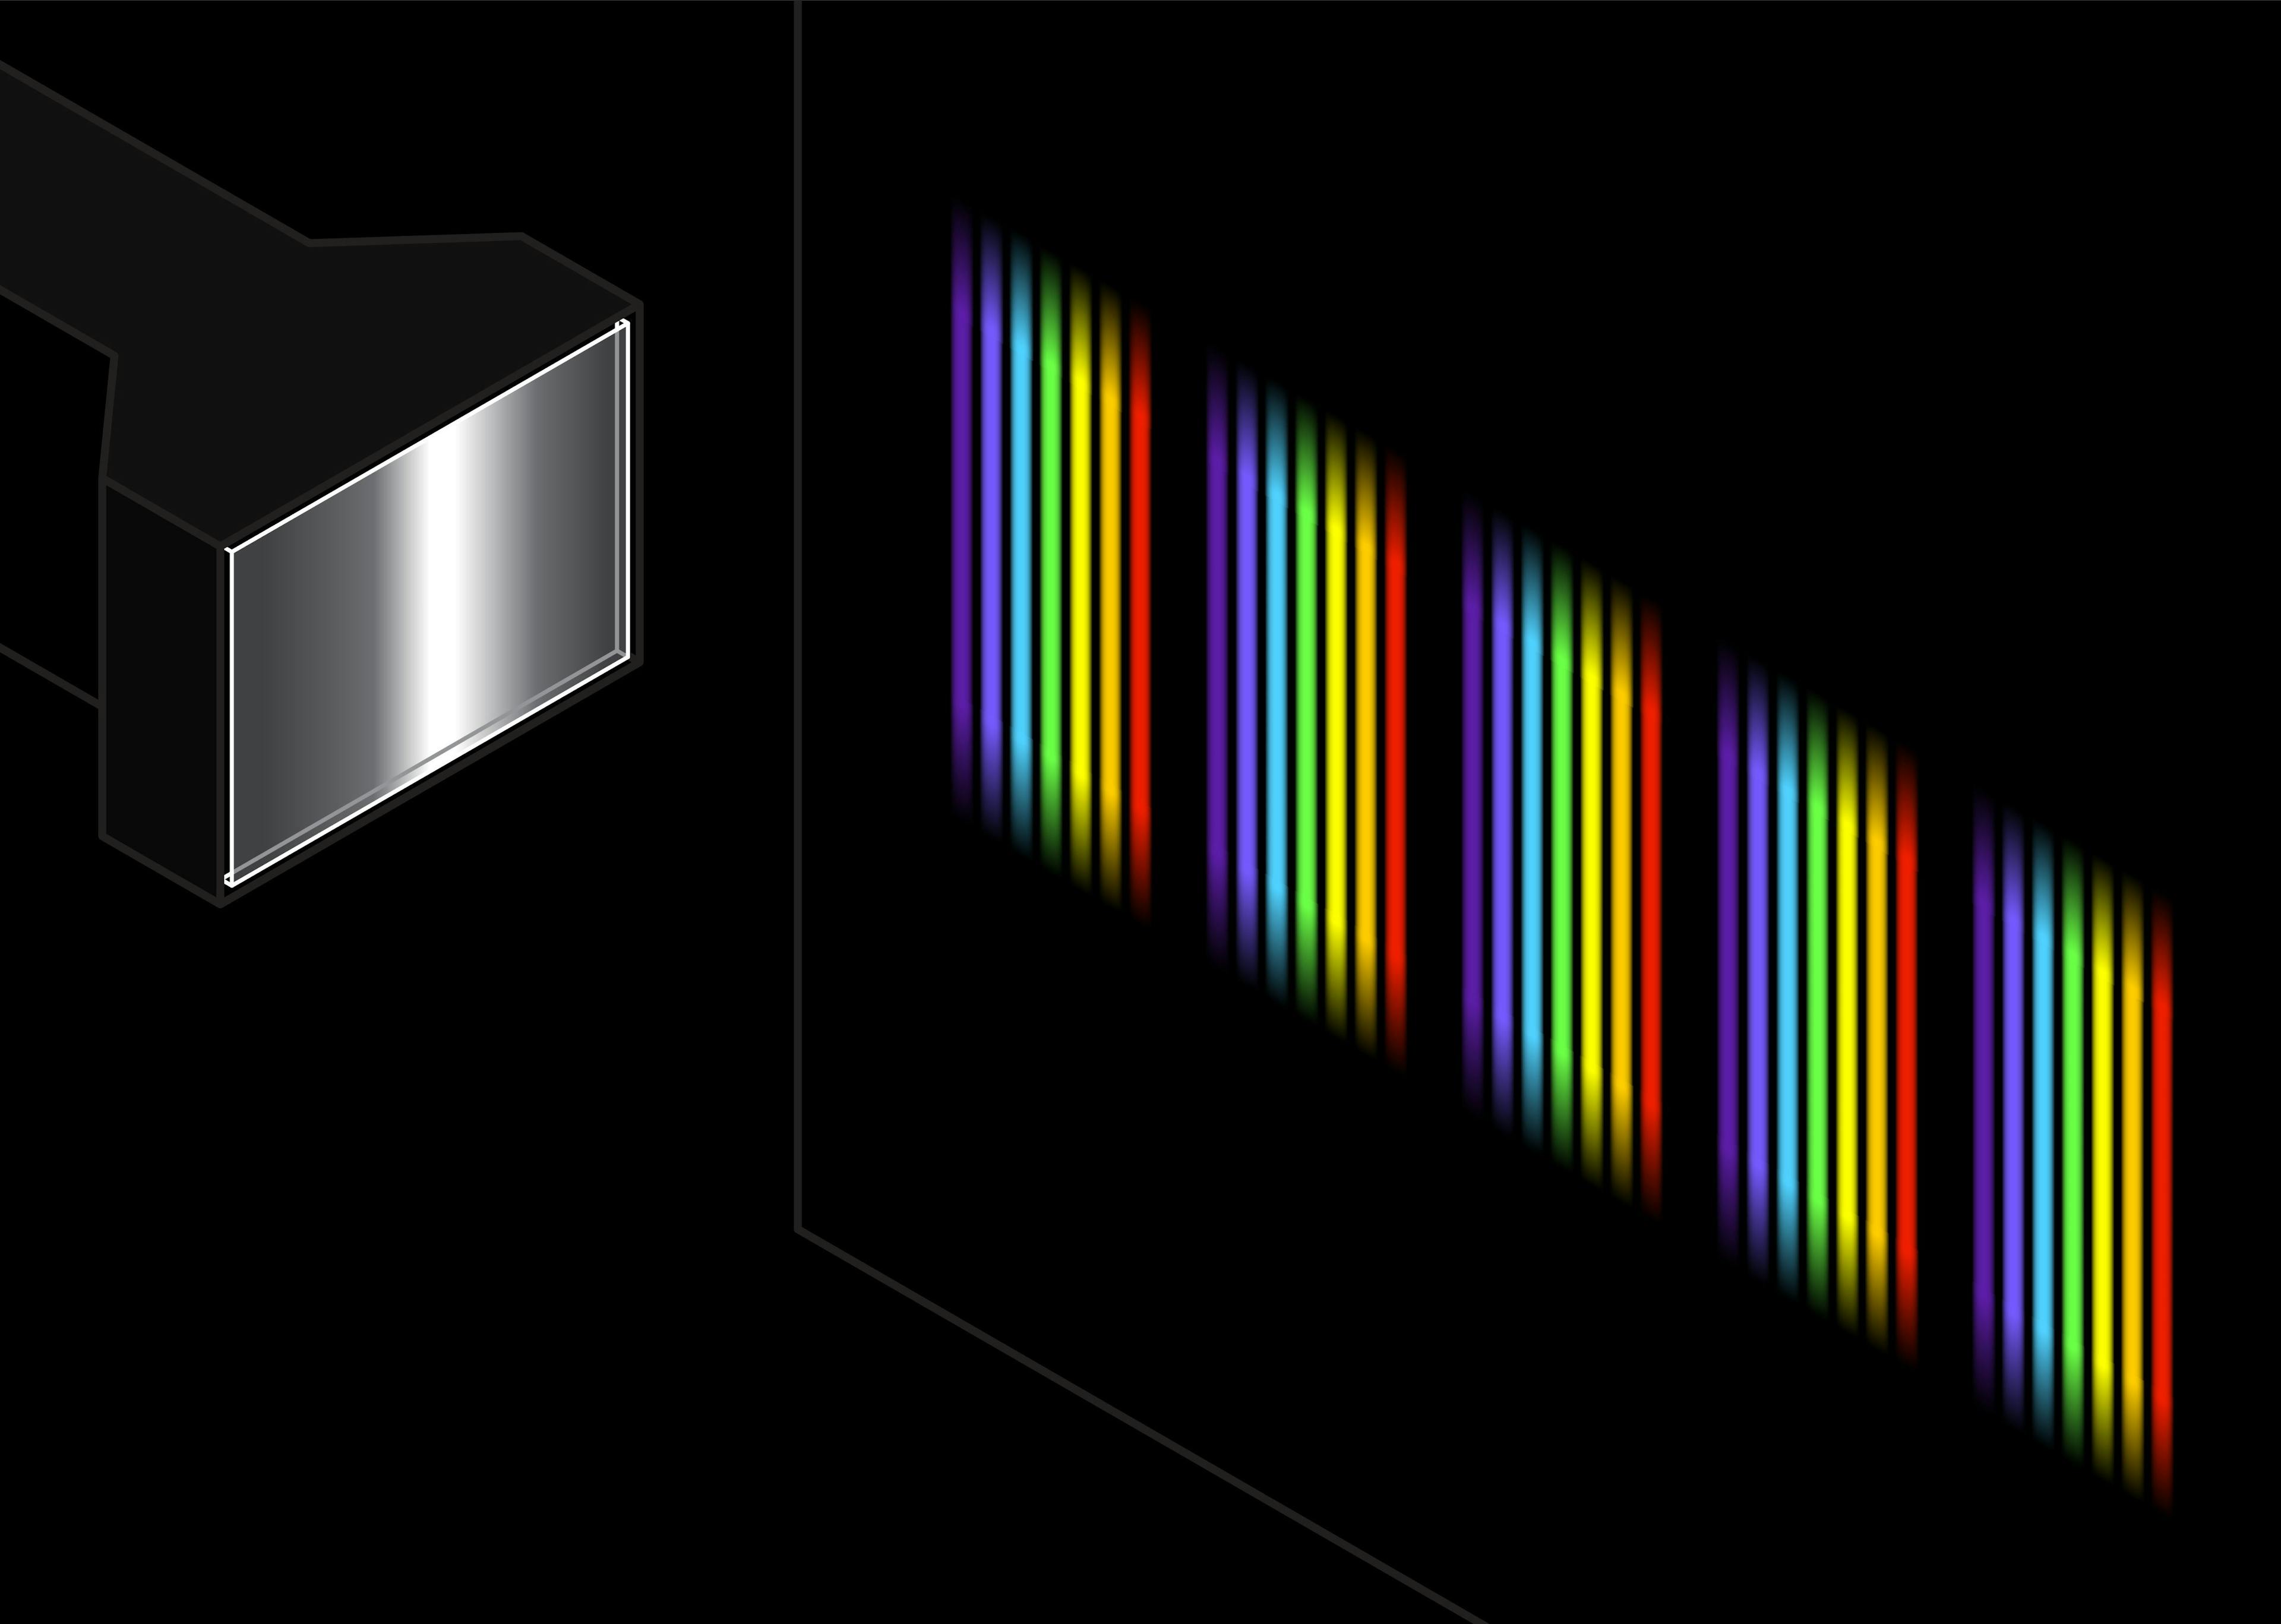 A diffraction grating splitting white light into a series of spectra.